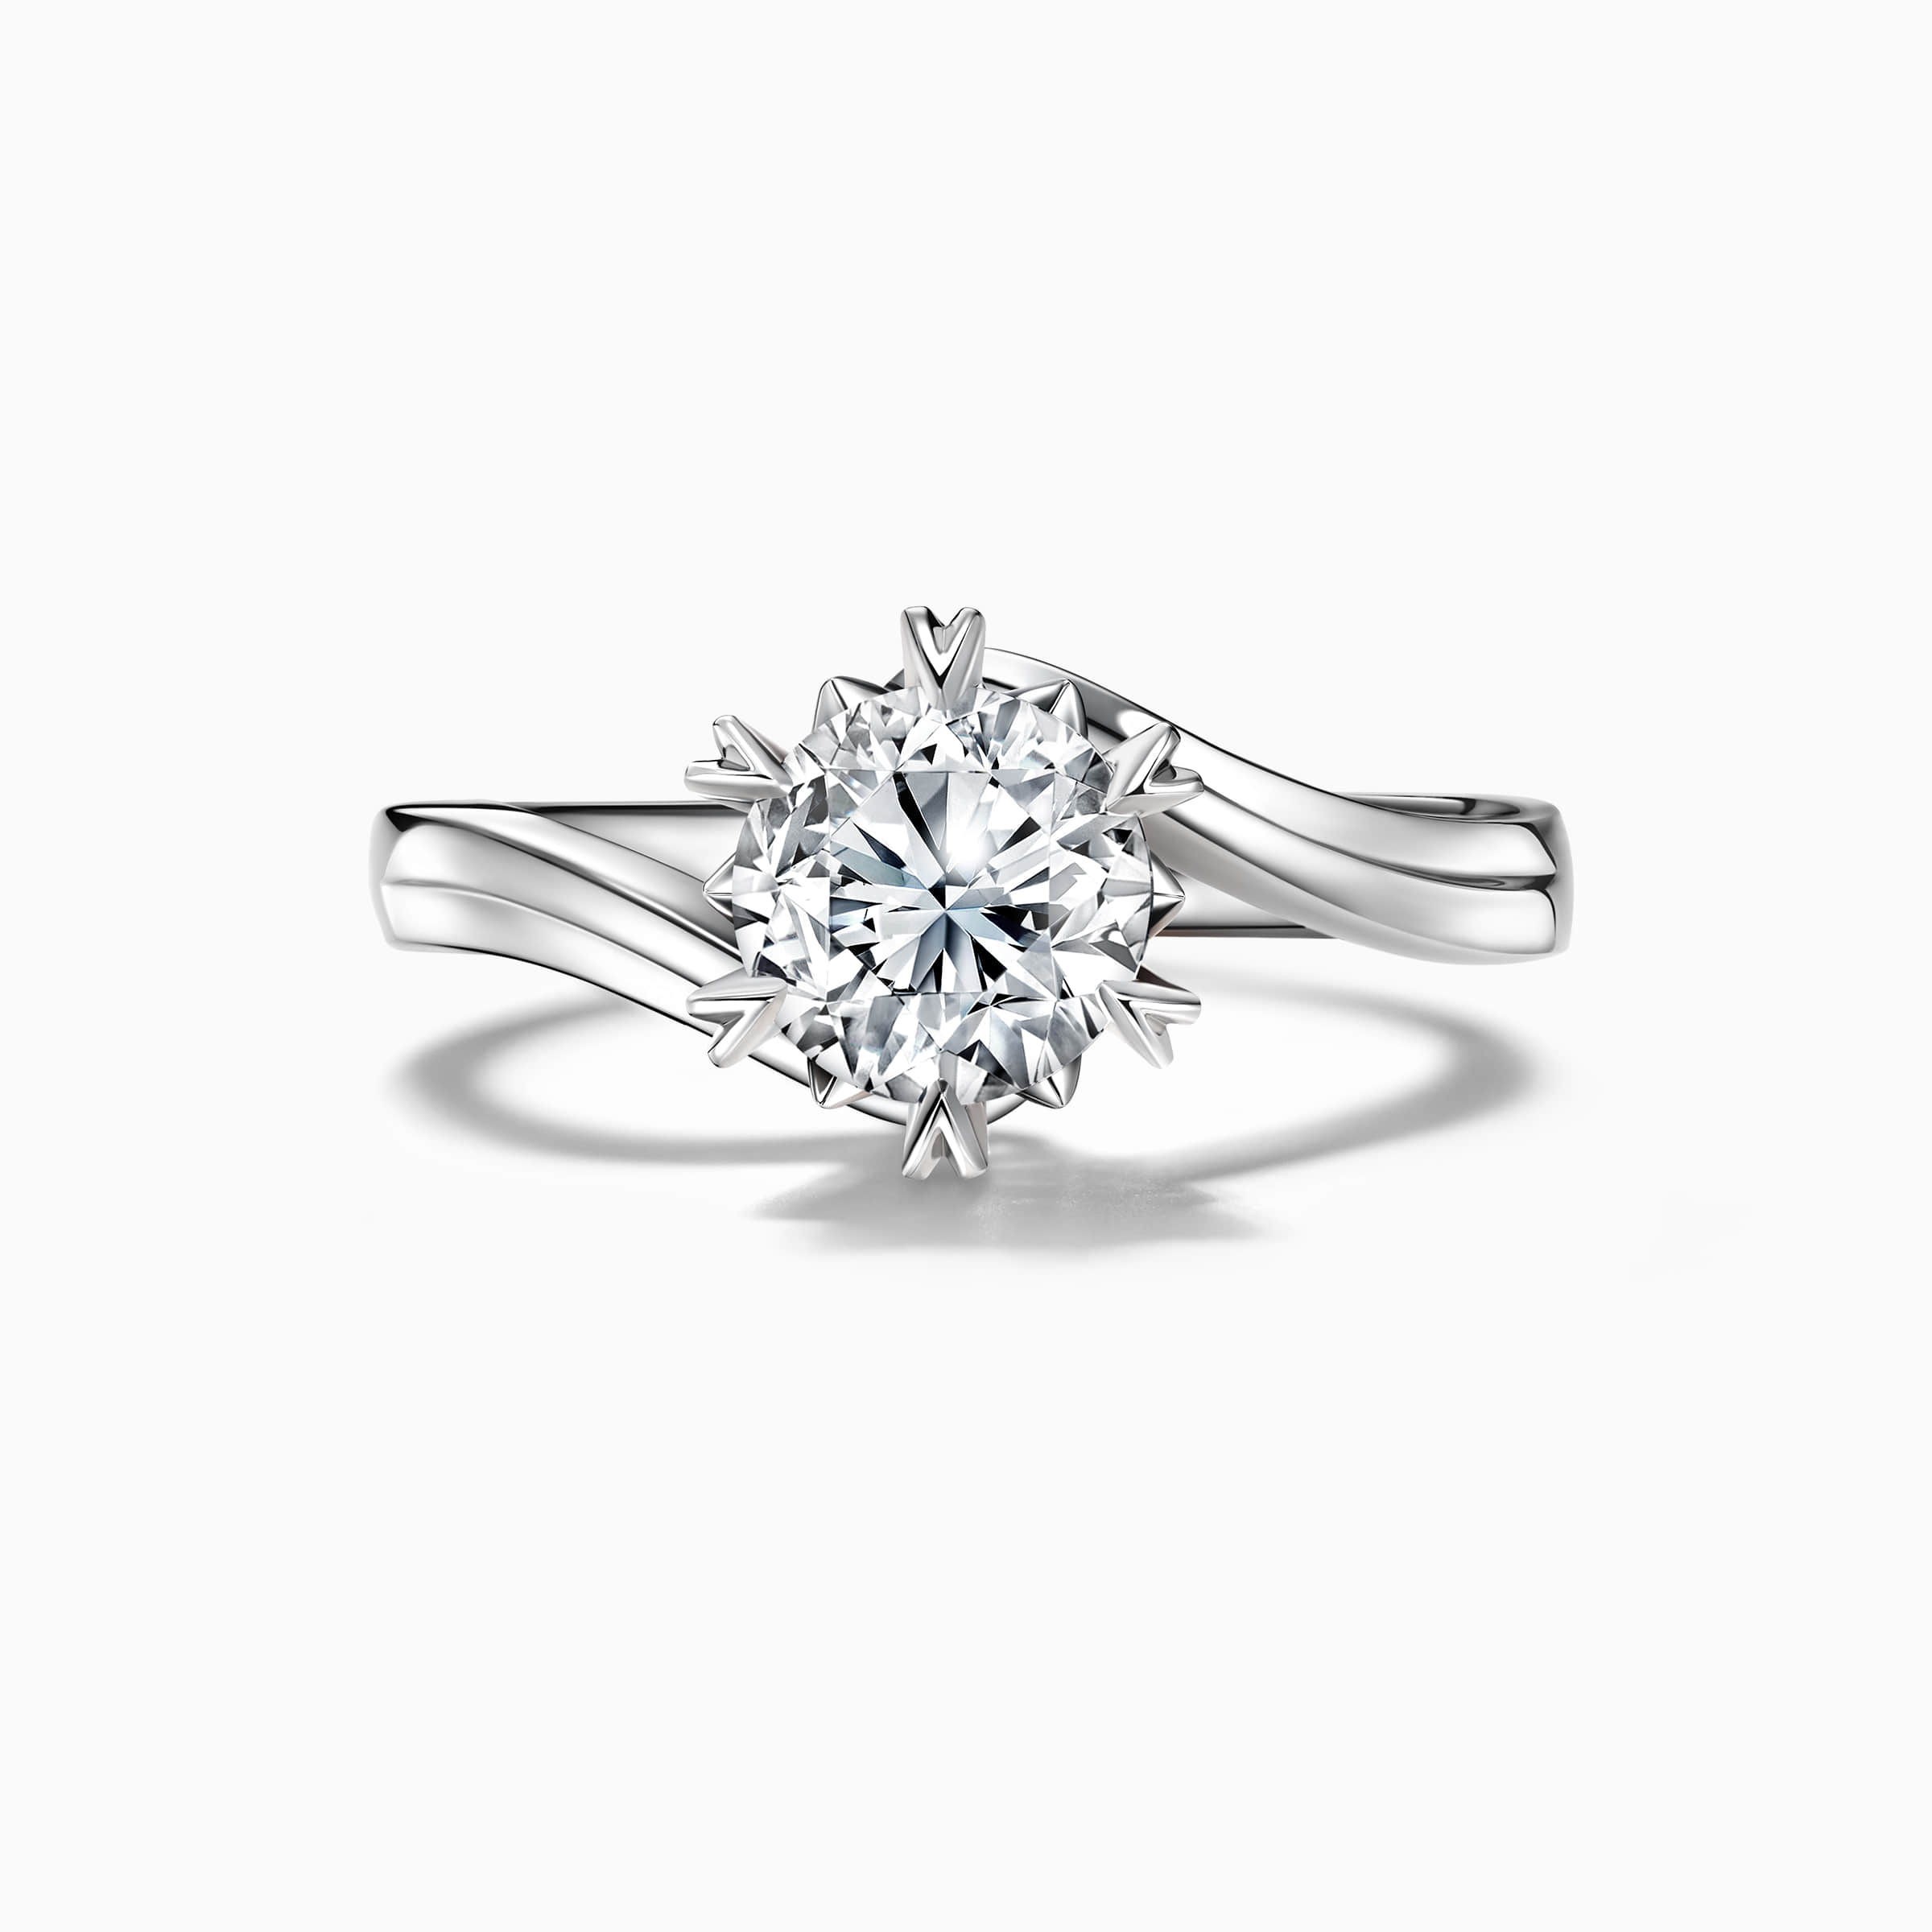 Darry Ring snowflake bypass promise ring white gold